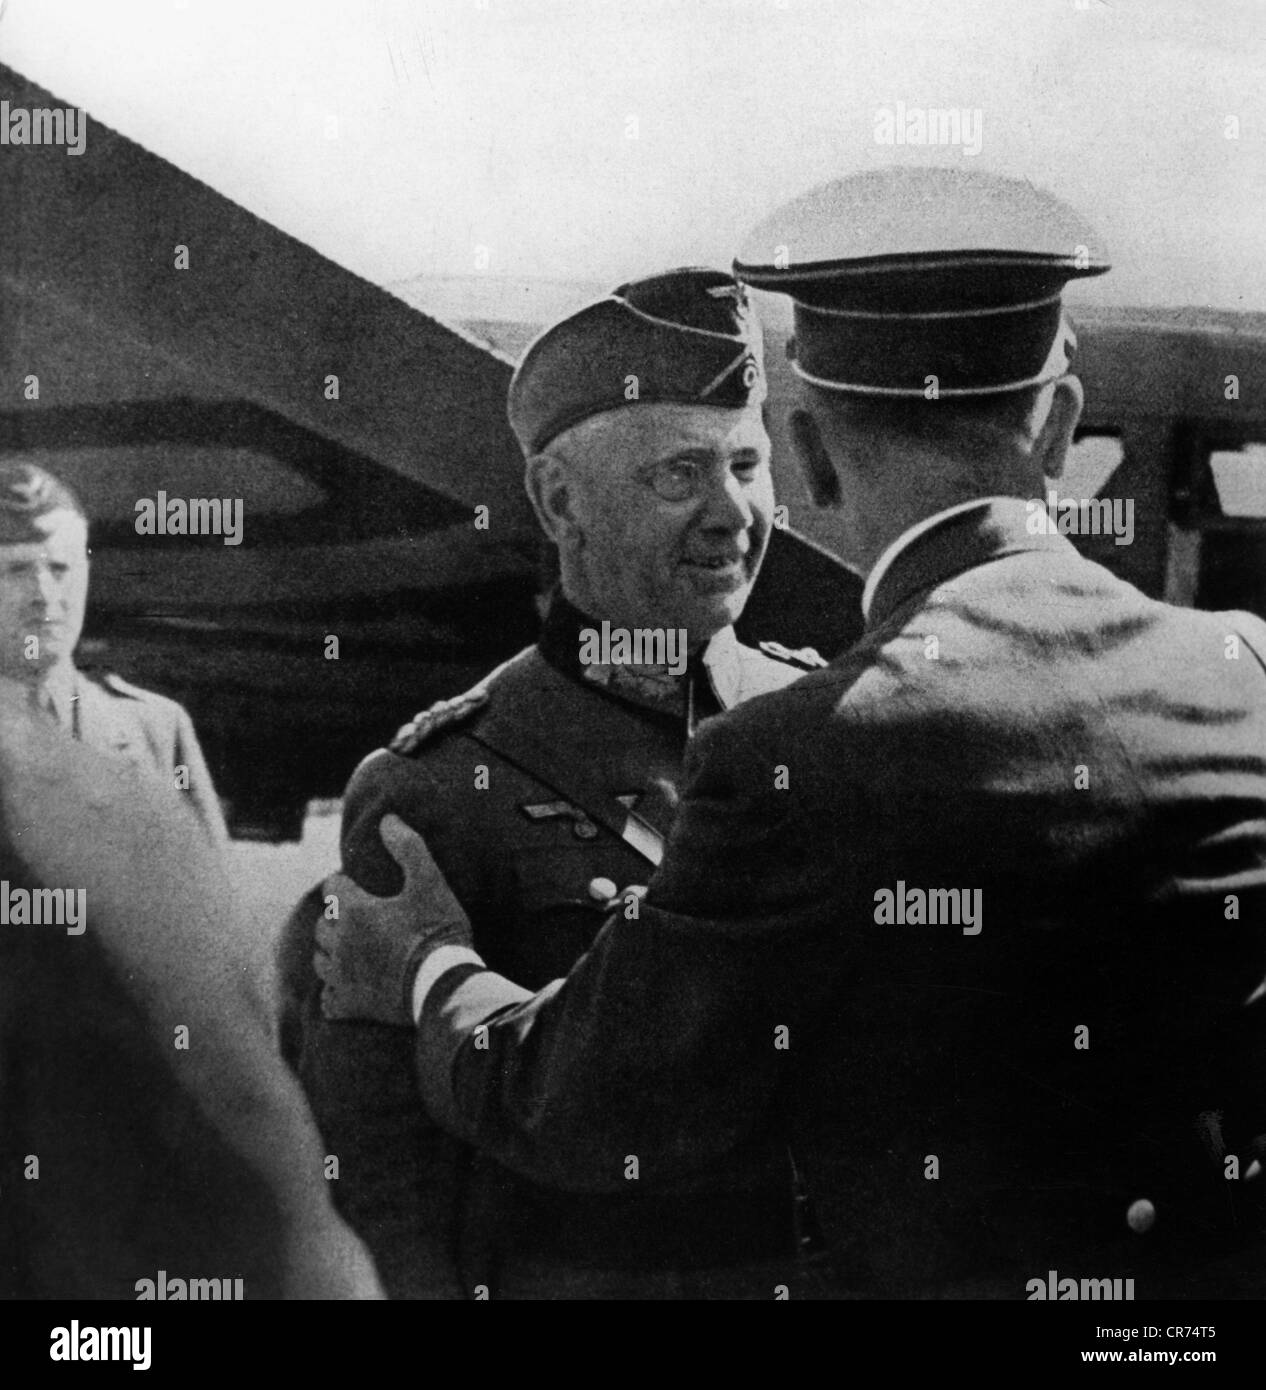 Reichenau, Walter von, 8.10.1884 - 17.1.1942, German general, commander-in-chief of 10th Army 6.8.- 10.10.1939, is greeted by Adolf Hitler, Poland, September 1939, , Stock Photo